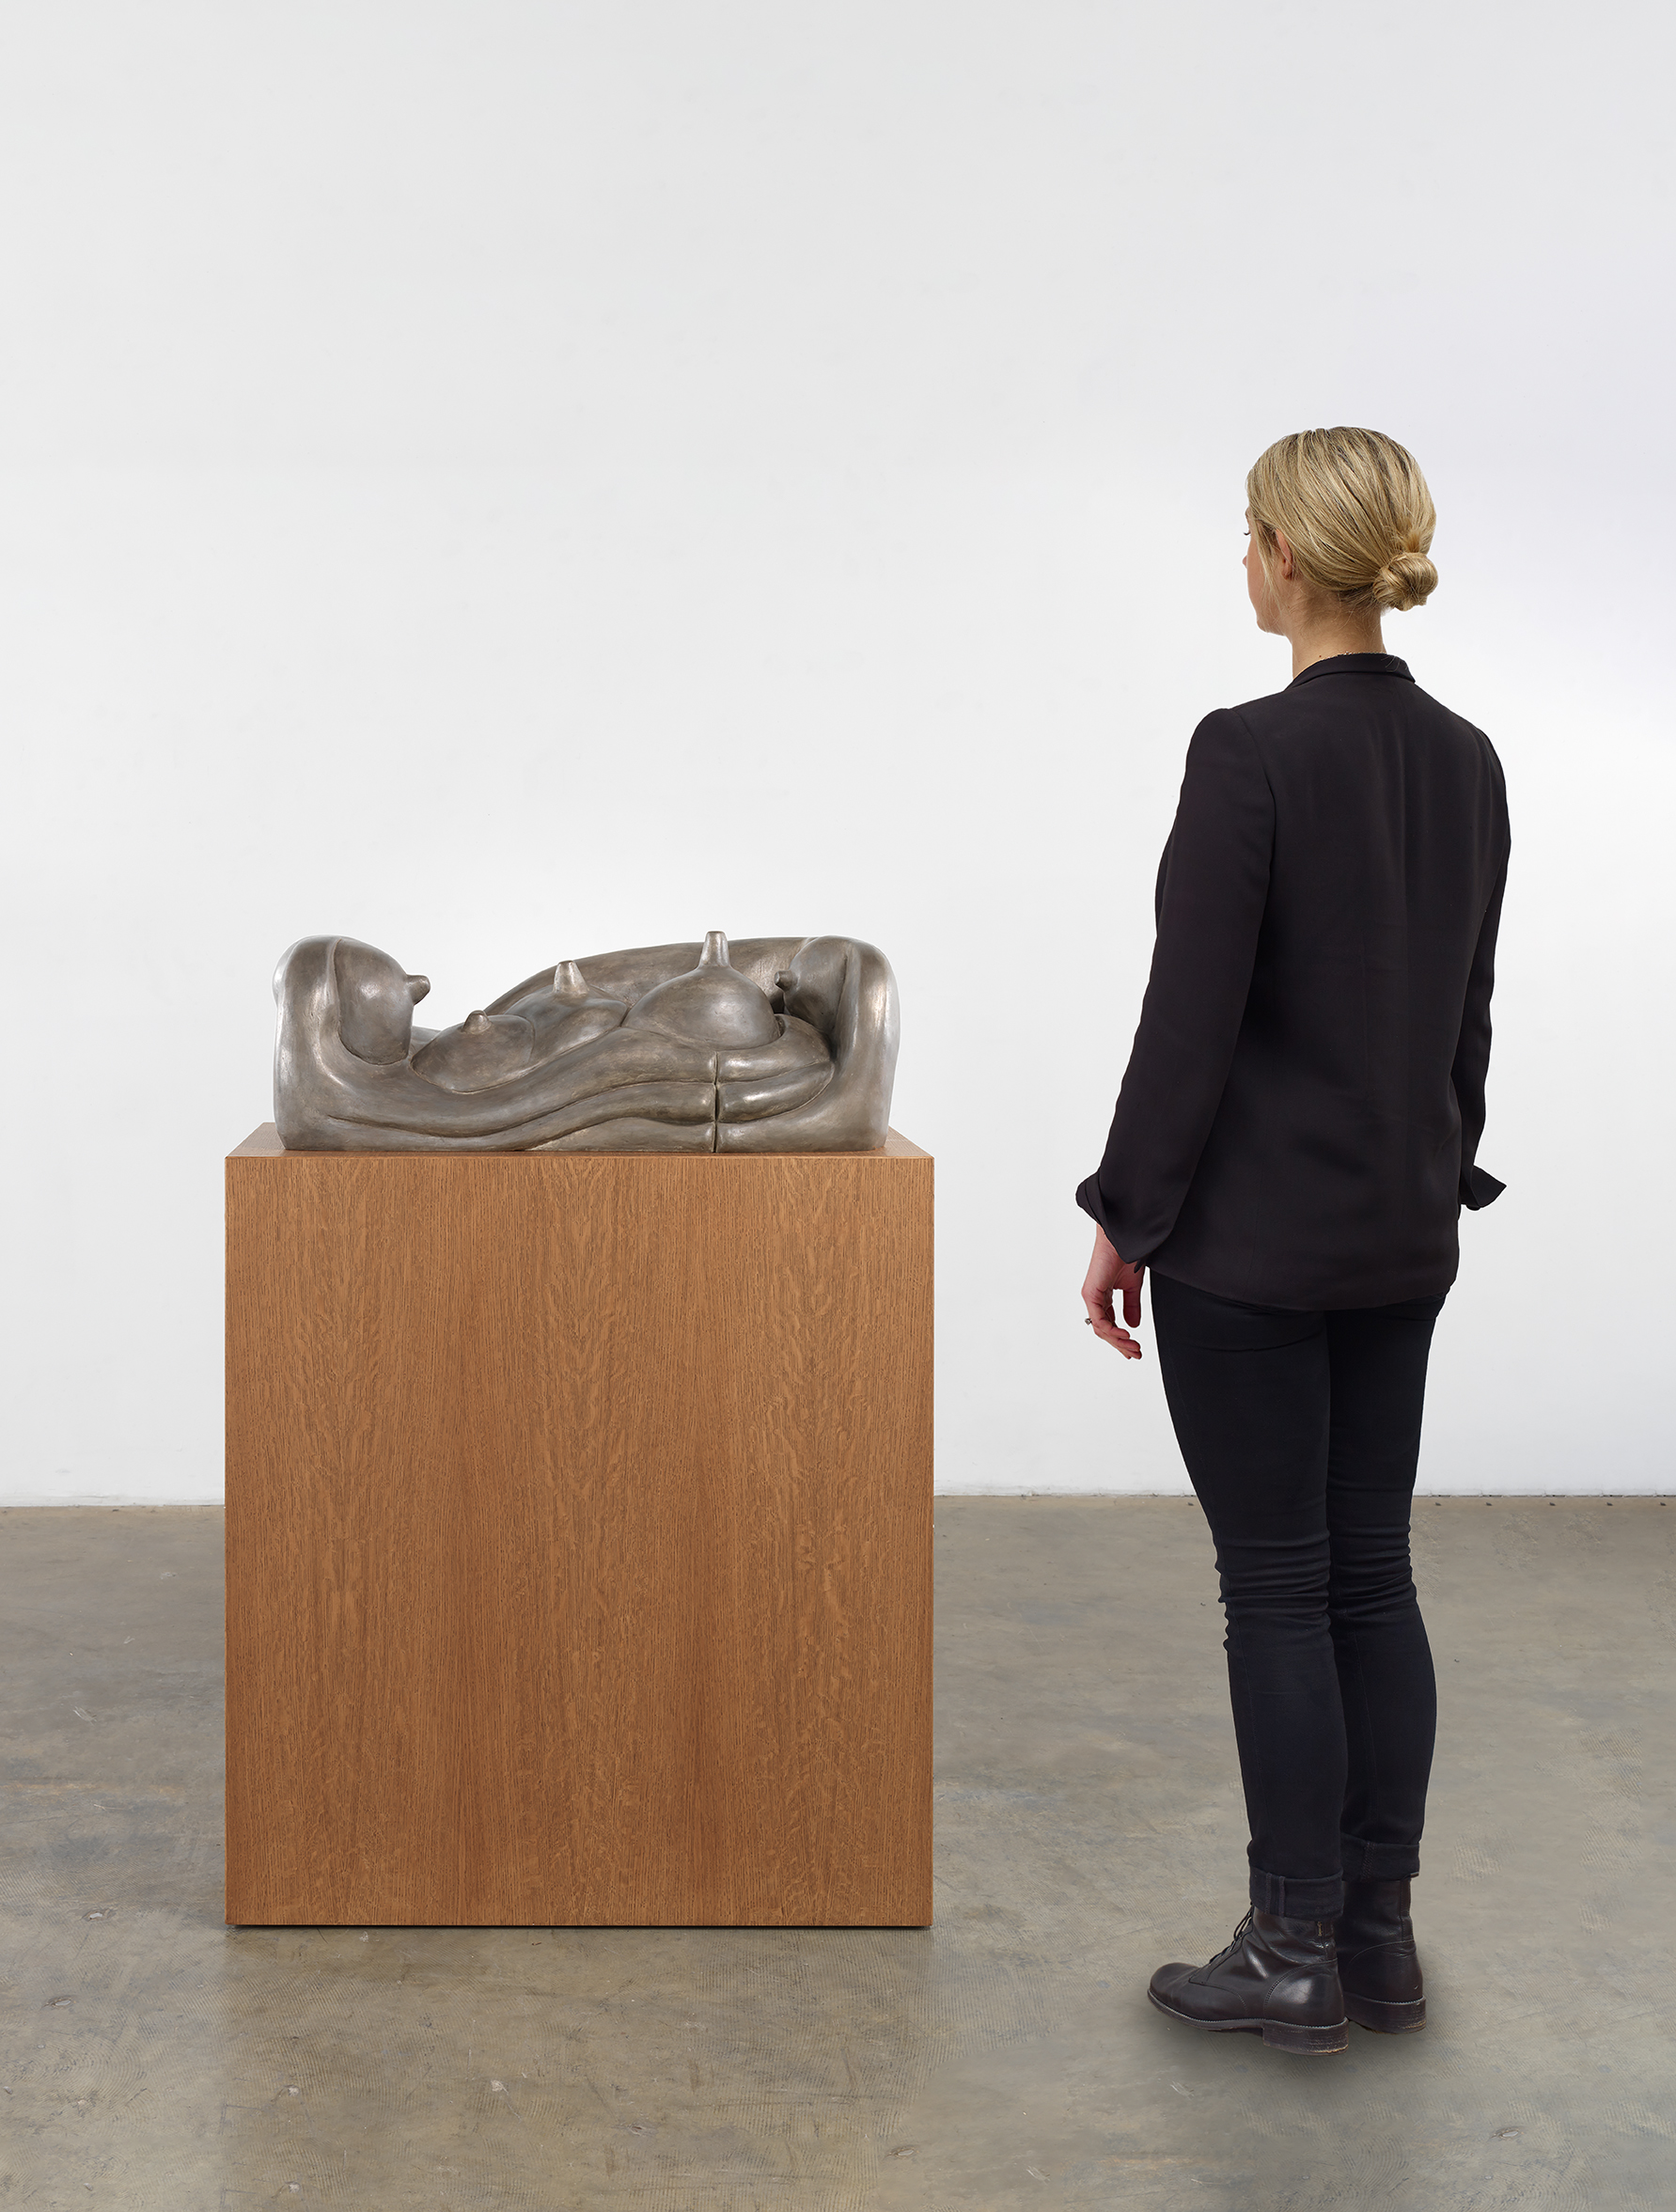 Scale view of Louise Bourgeois's bronze sculpture Breasts and Blade